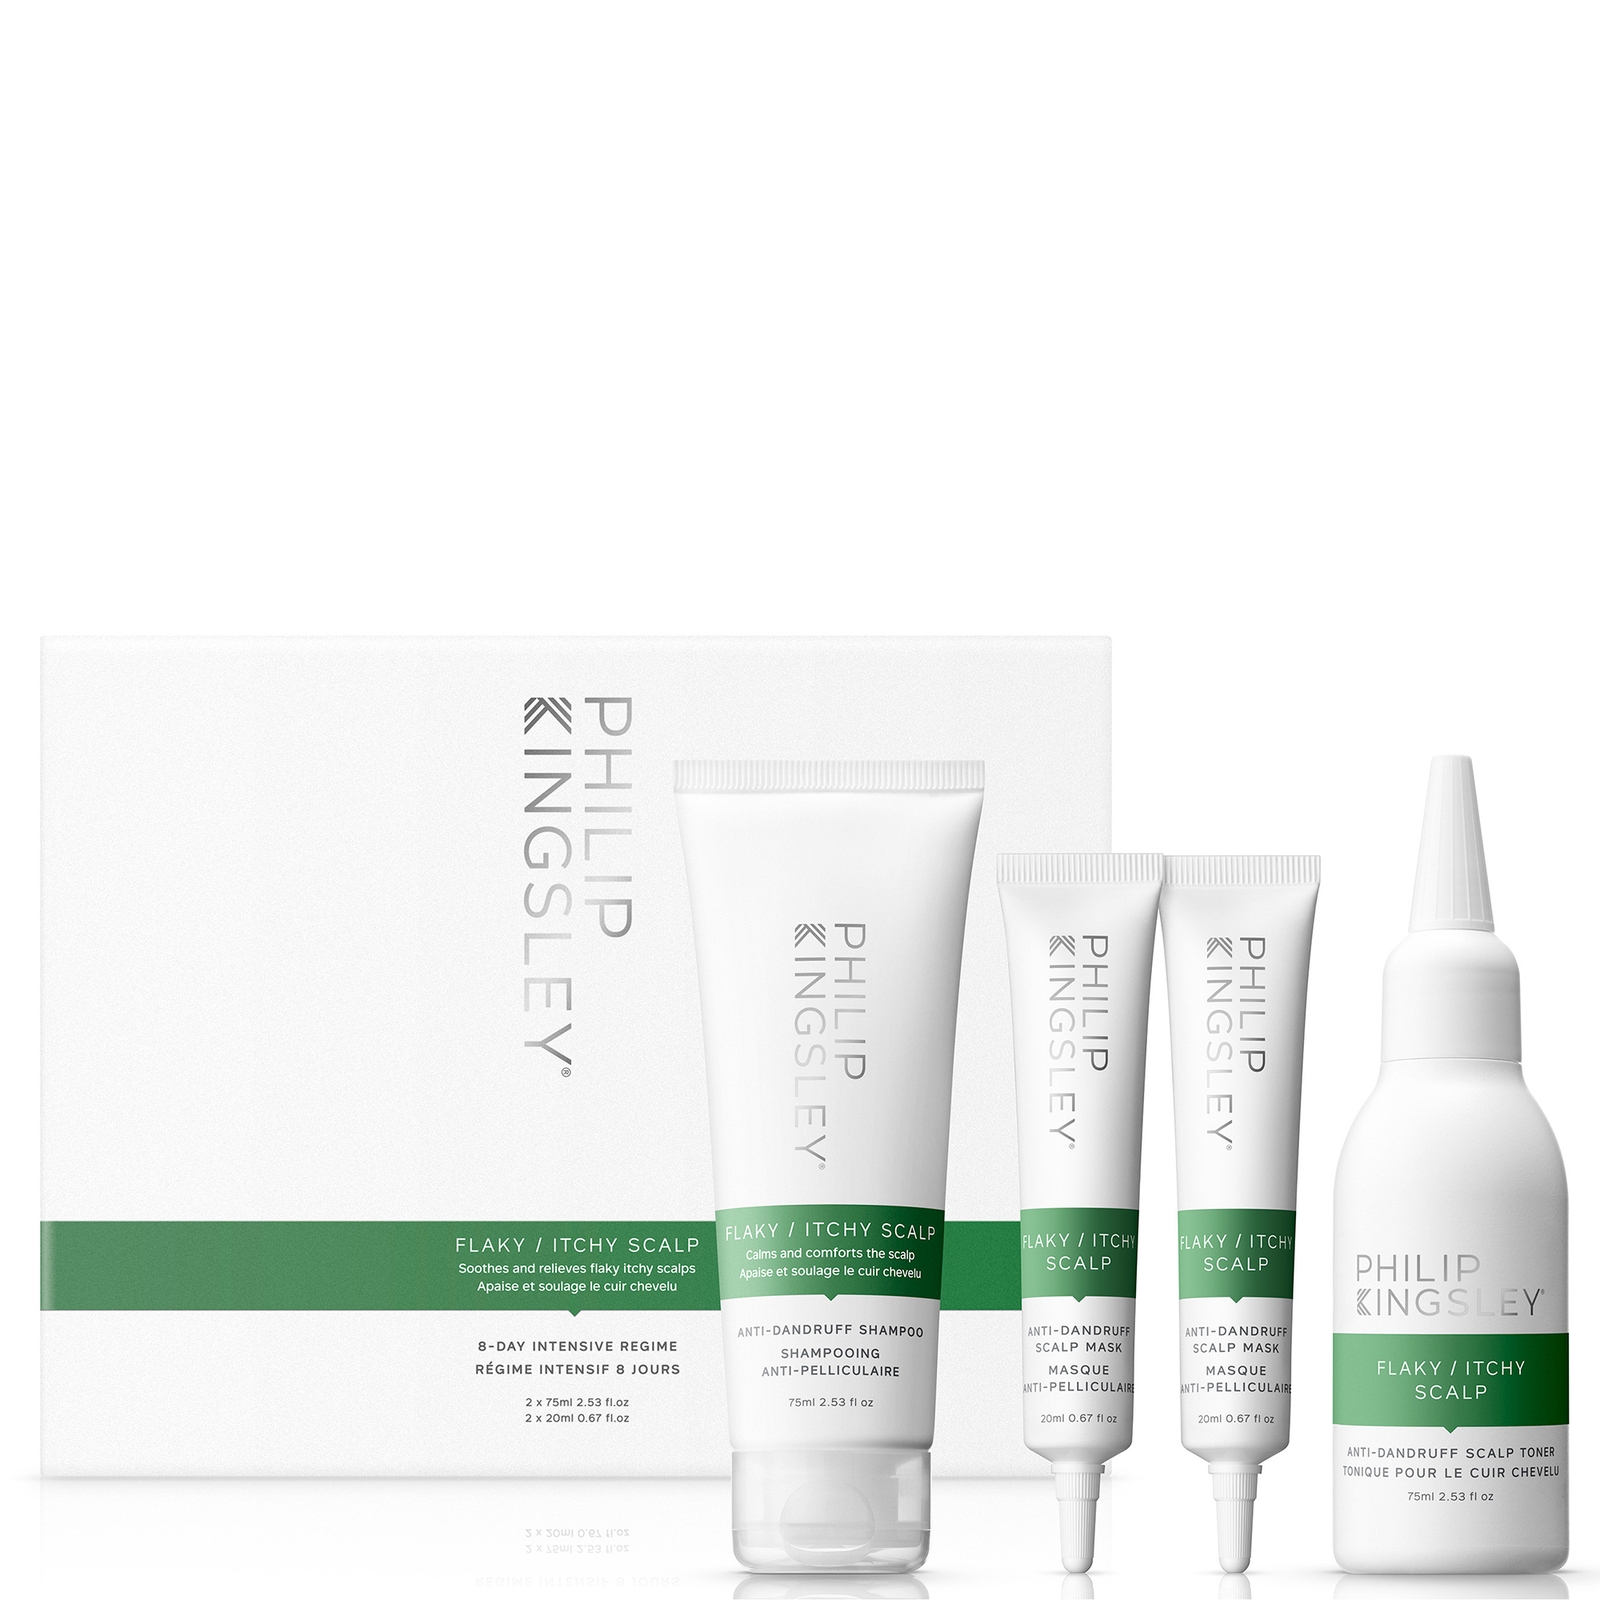 Image of Philip Kingsley Flaky/Itchy Scalp 8-Day Kit